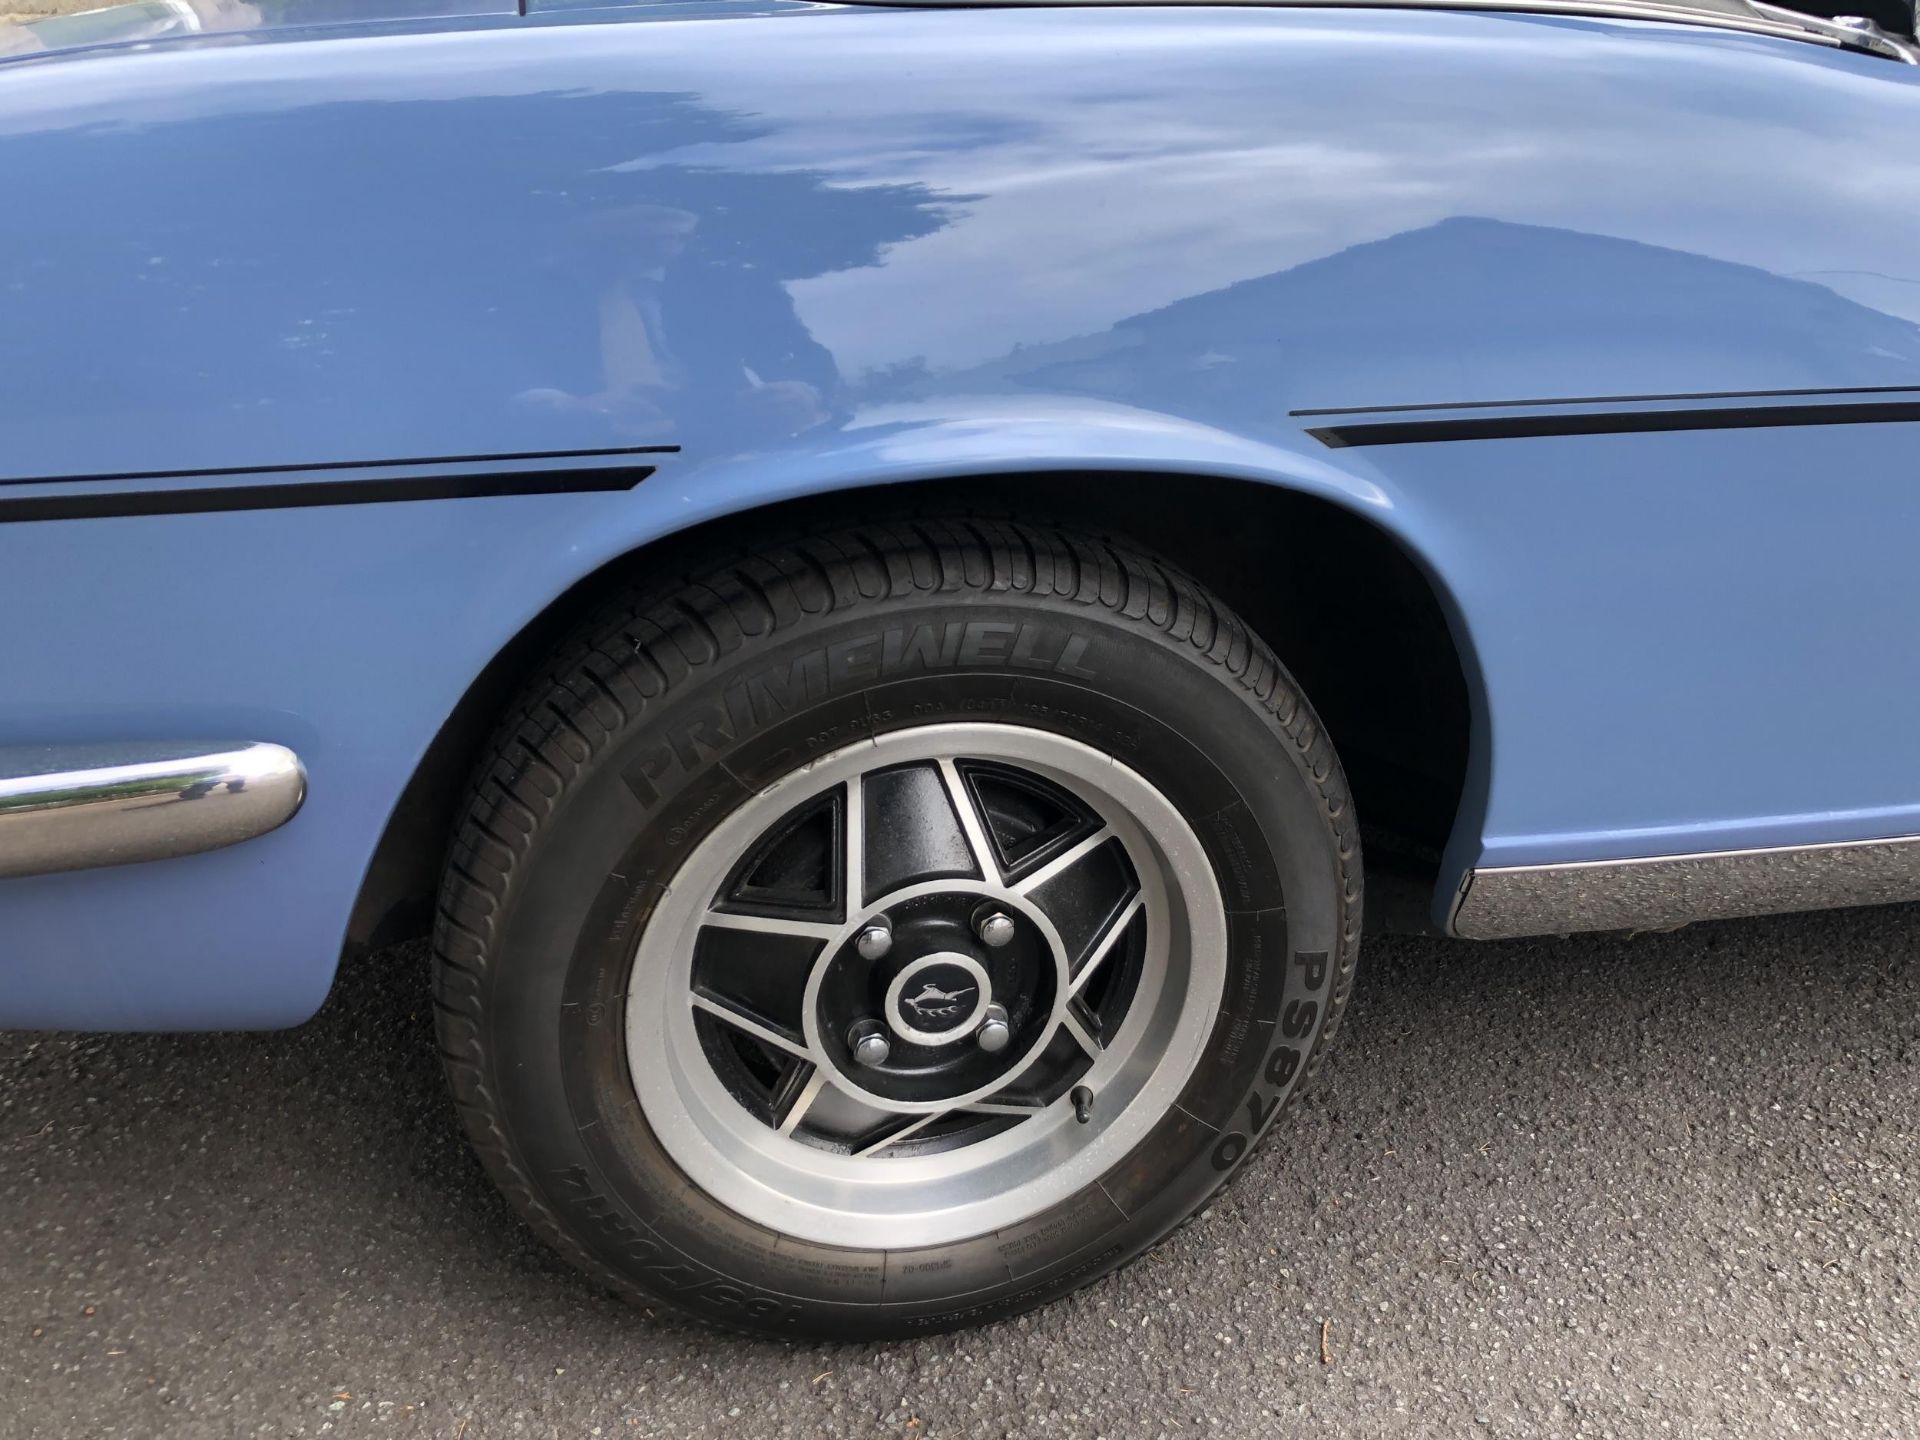 1975 Triumph Stag Registration number KNK 148N French blue with a black interior Automatic Gearbox - Image 6 of 57